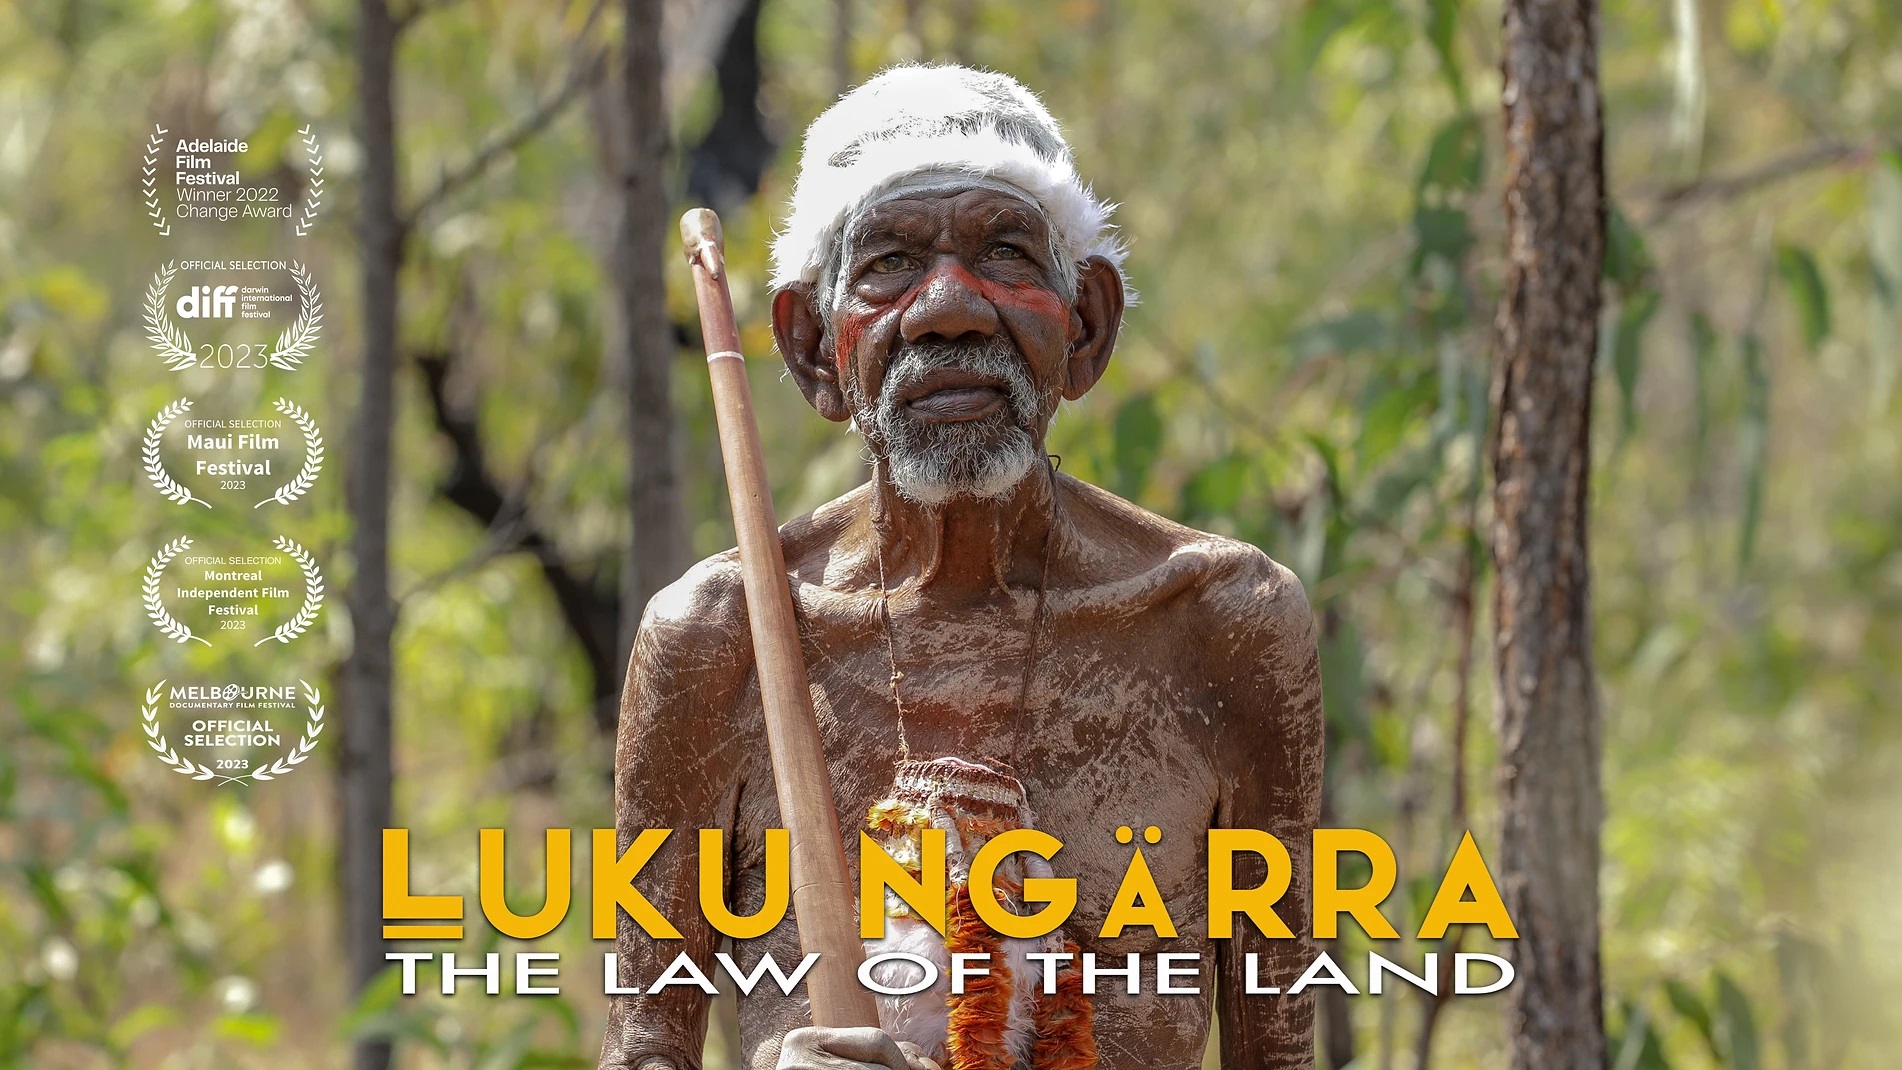 Luku Ngarra : The Law of the Land